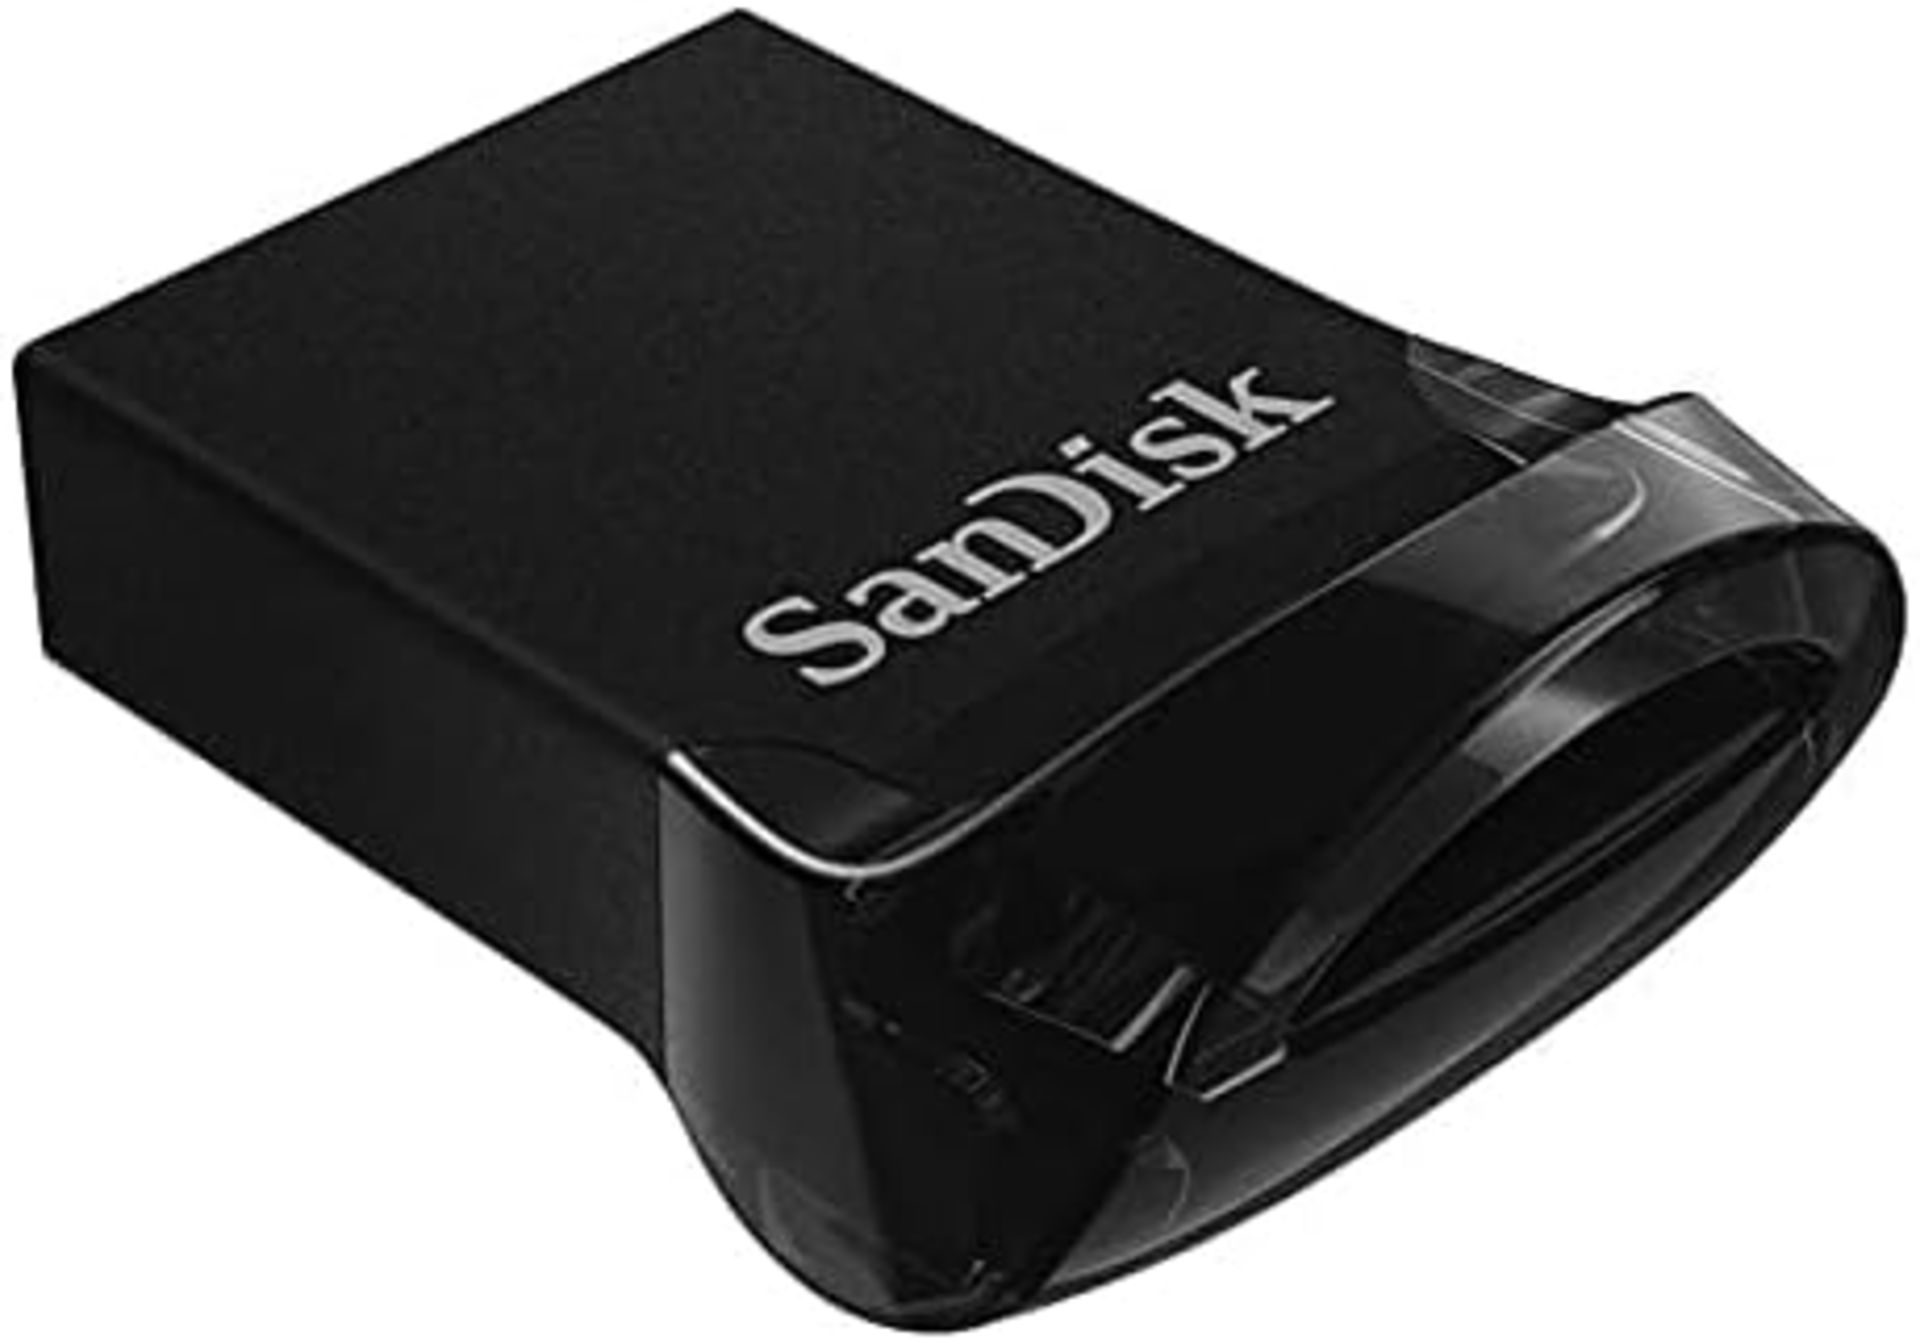 2x NEW FACTORY SEALED SANDISK Ultra Fit USB 3.2 Gen 1 256GB. RRP £51.99 EACH. Compact plug-and- - Image 6 of 6